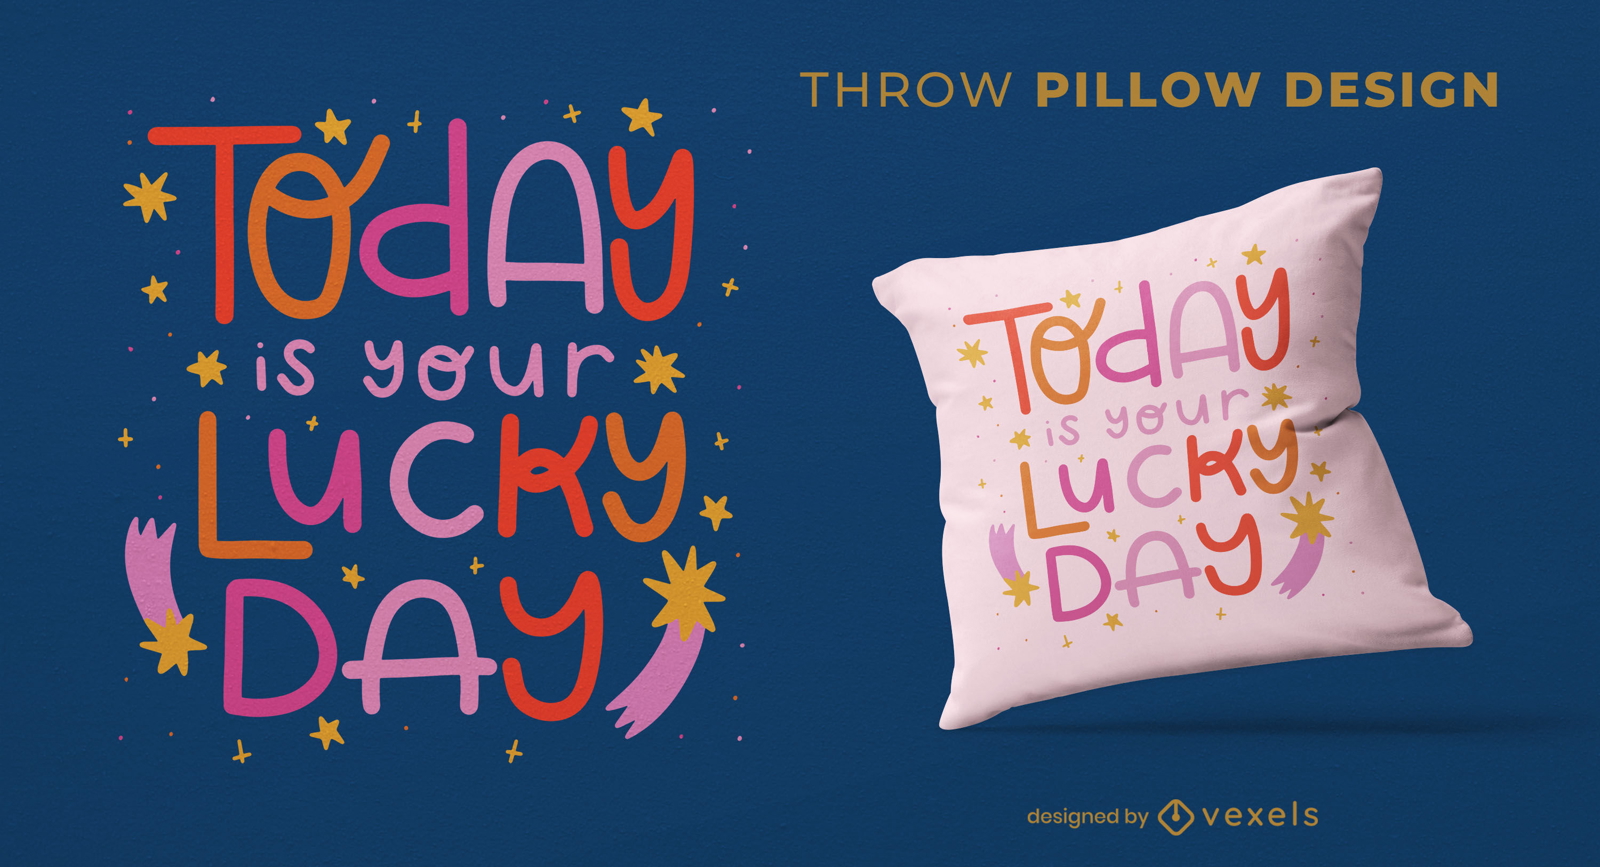 Lucky day quote throw pillow design